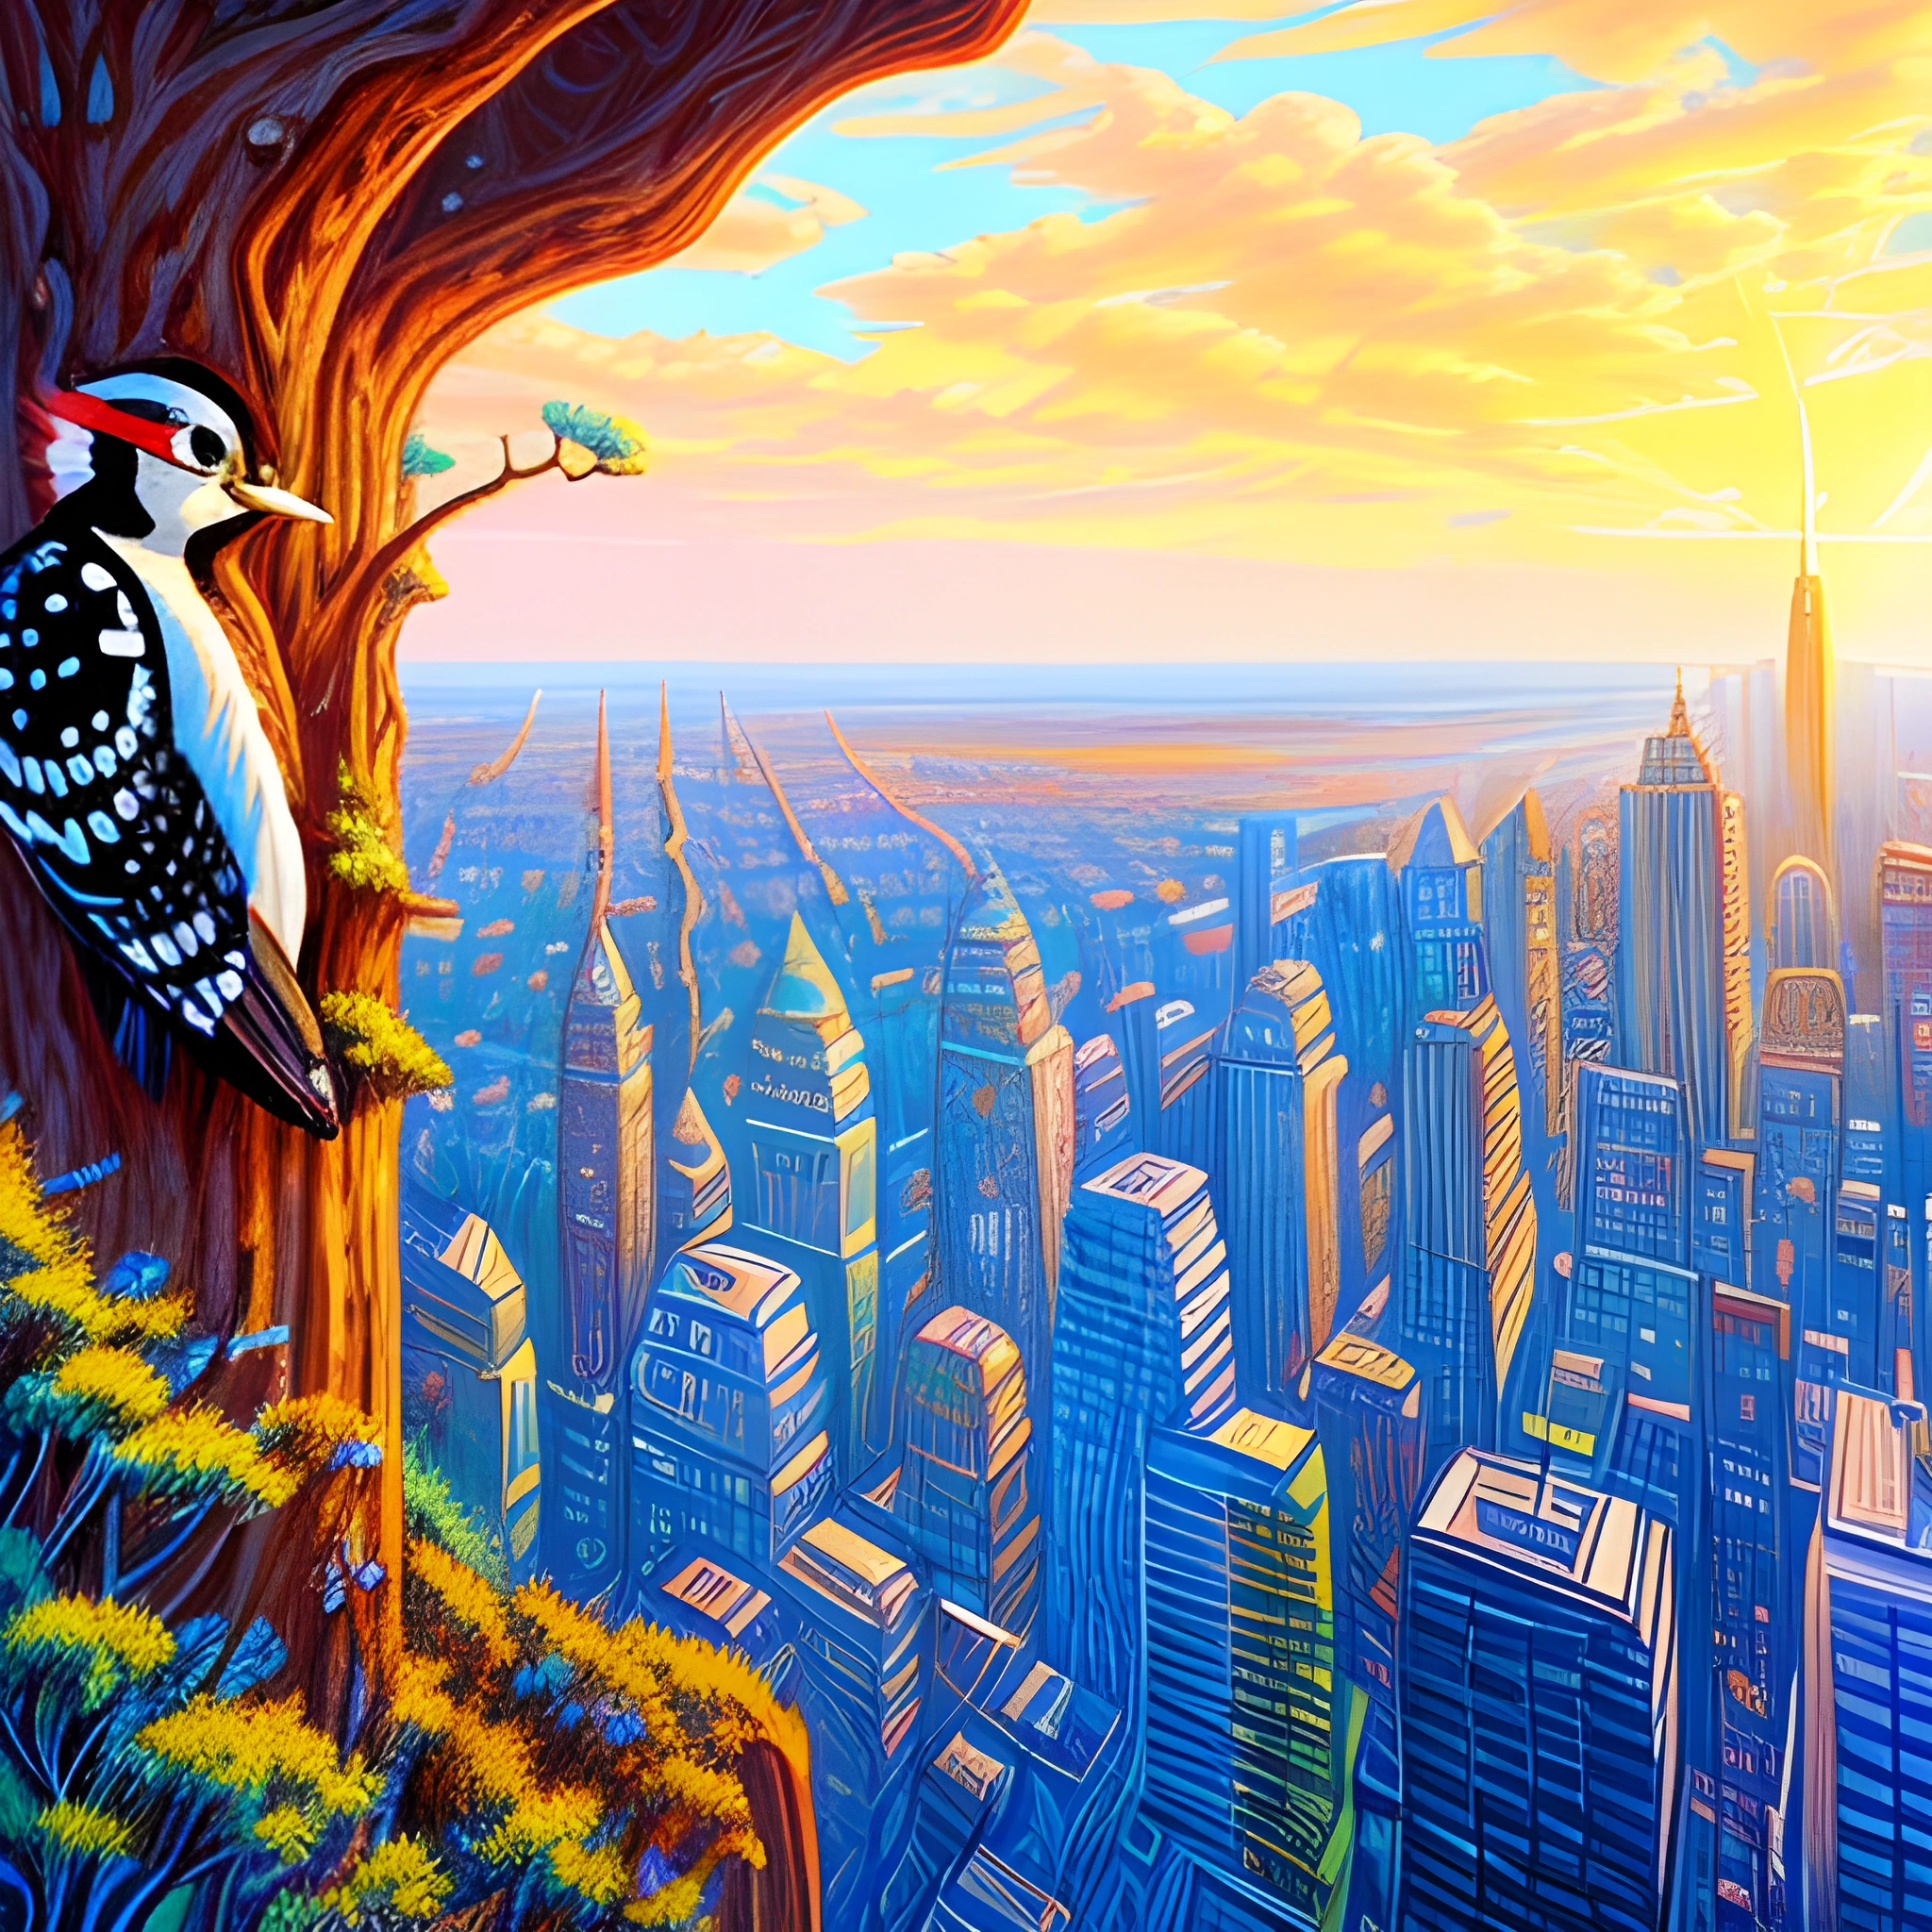 painting of a bird perched on a tree in front of a city